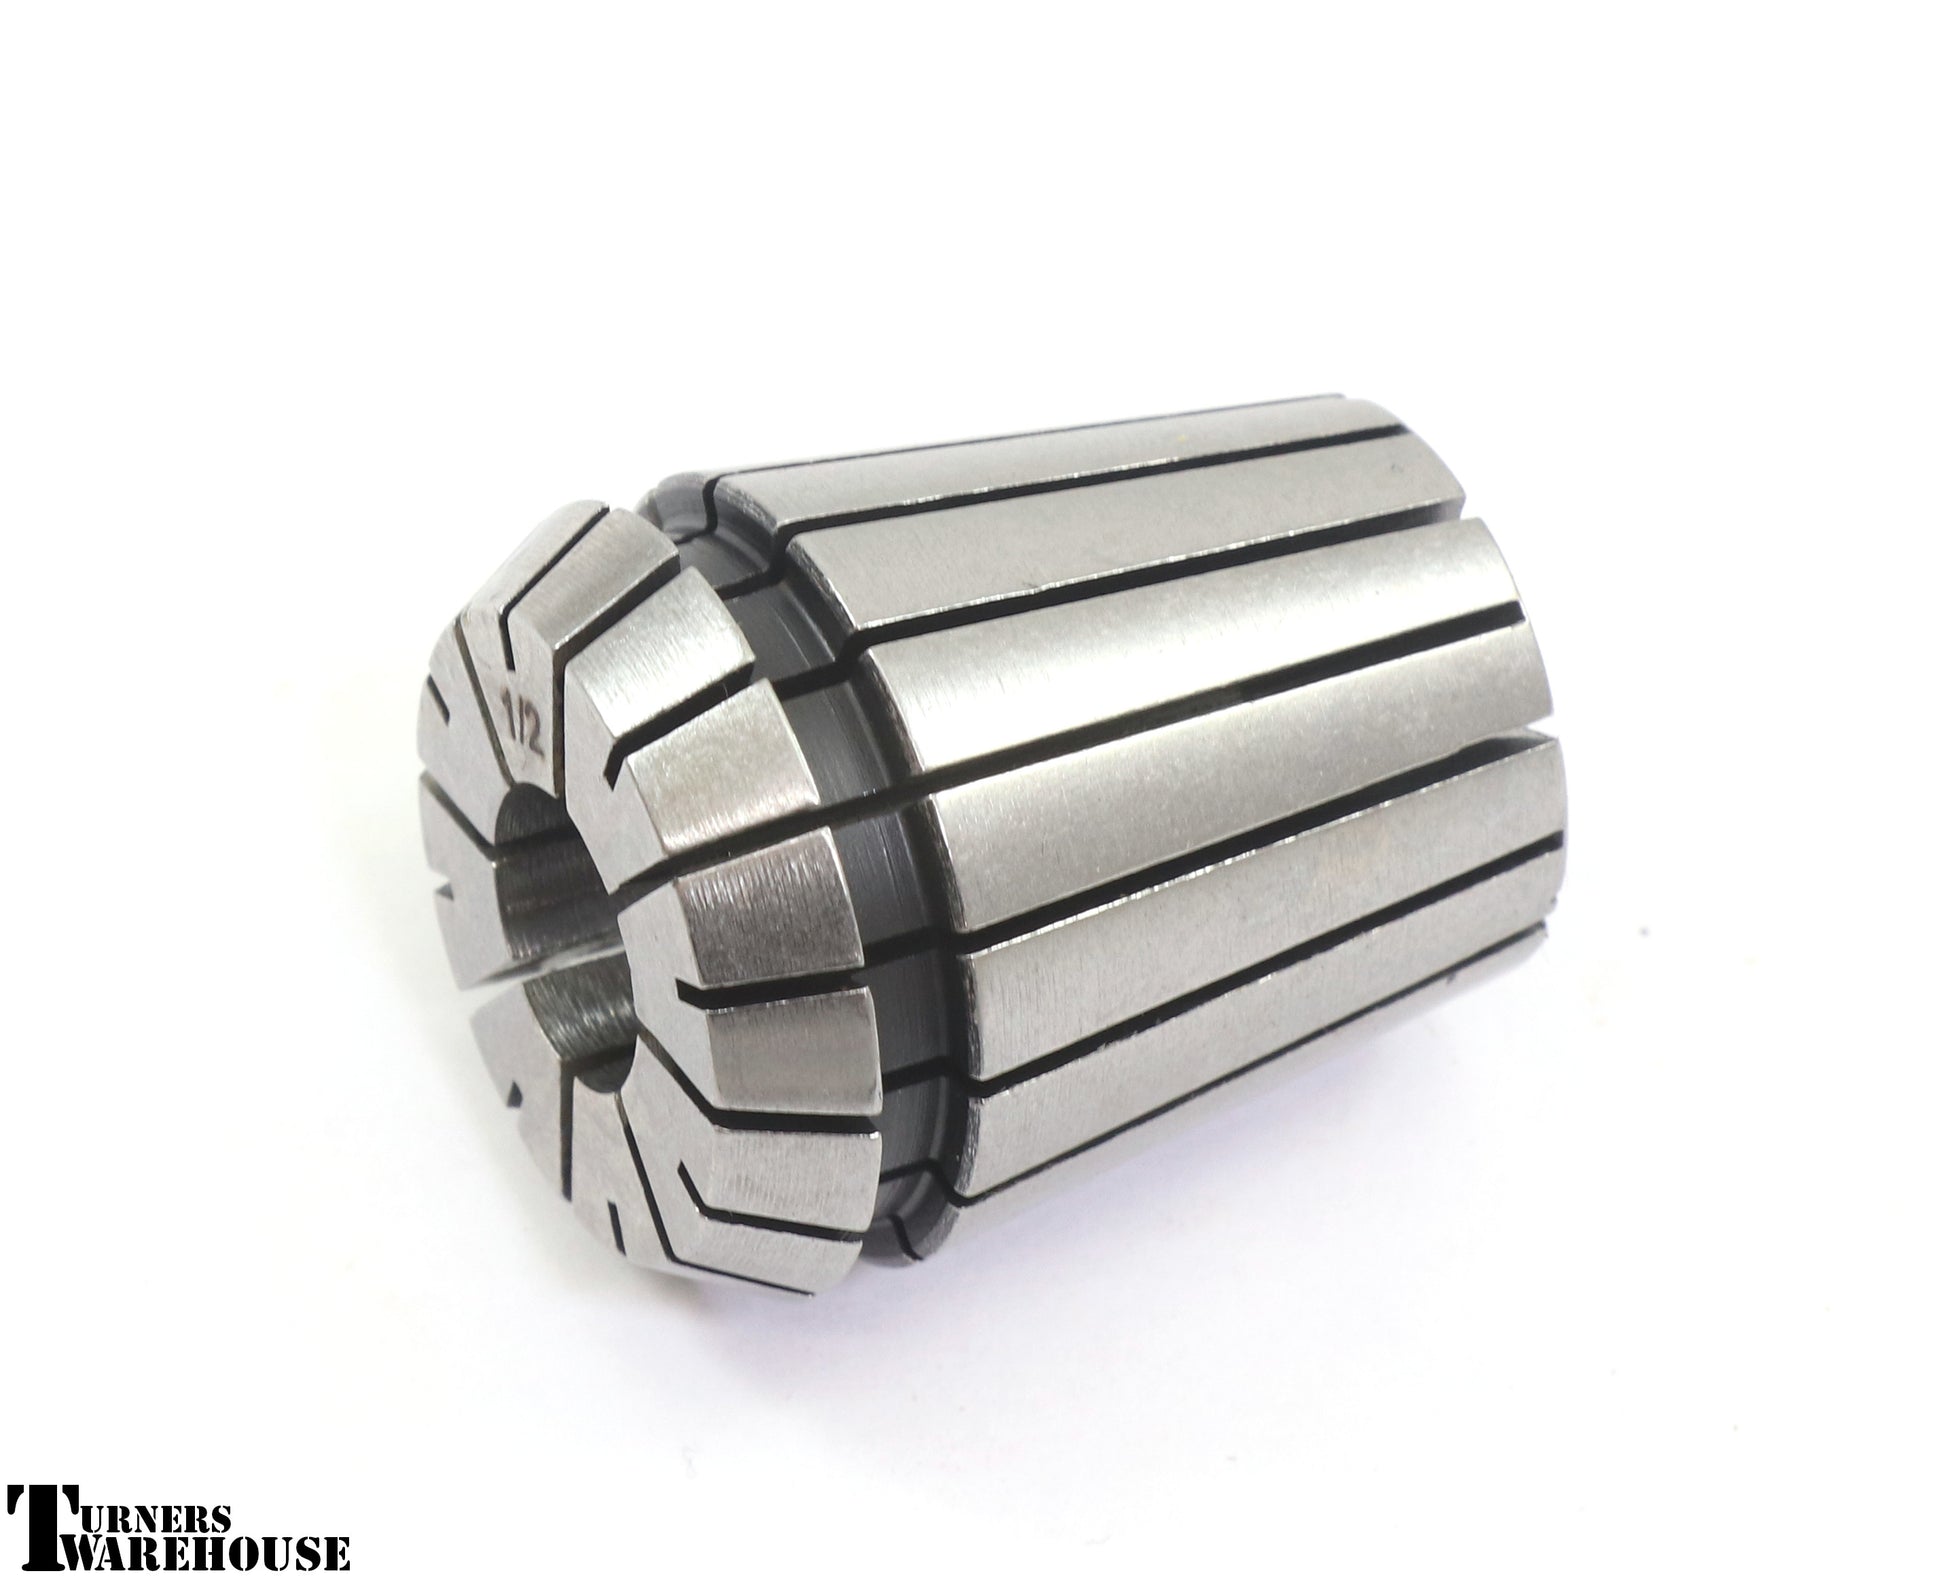 Collet Chuck 1/2" Collet